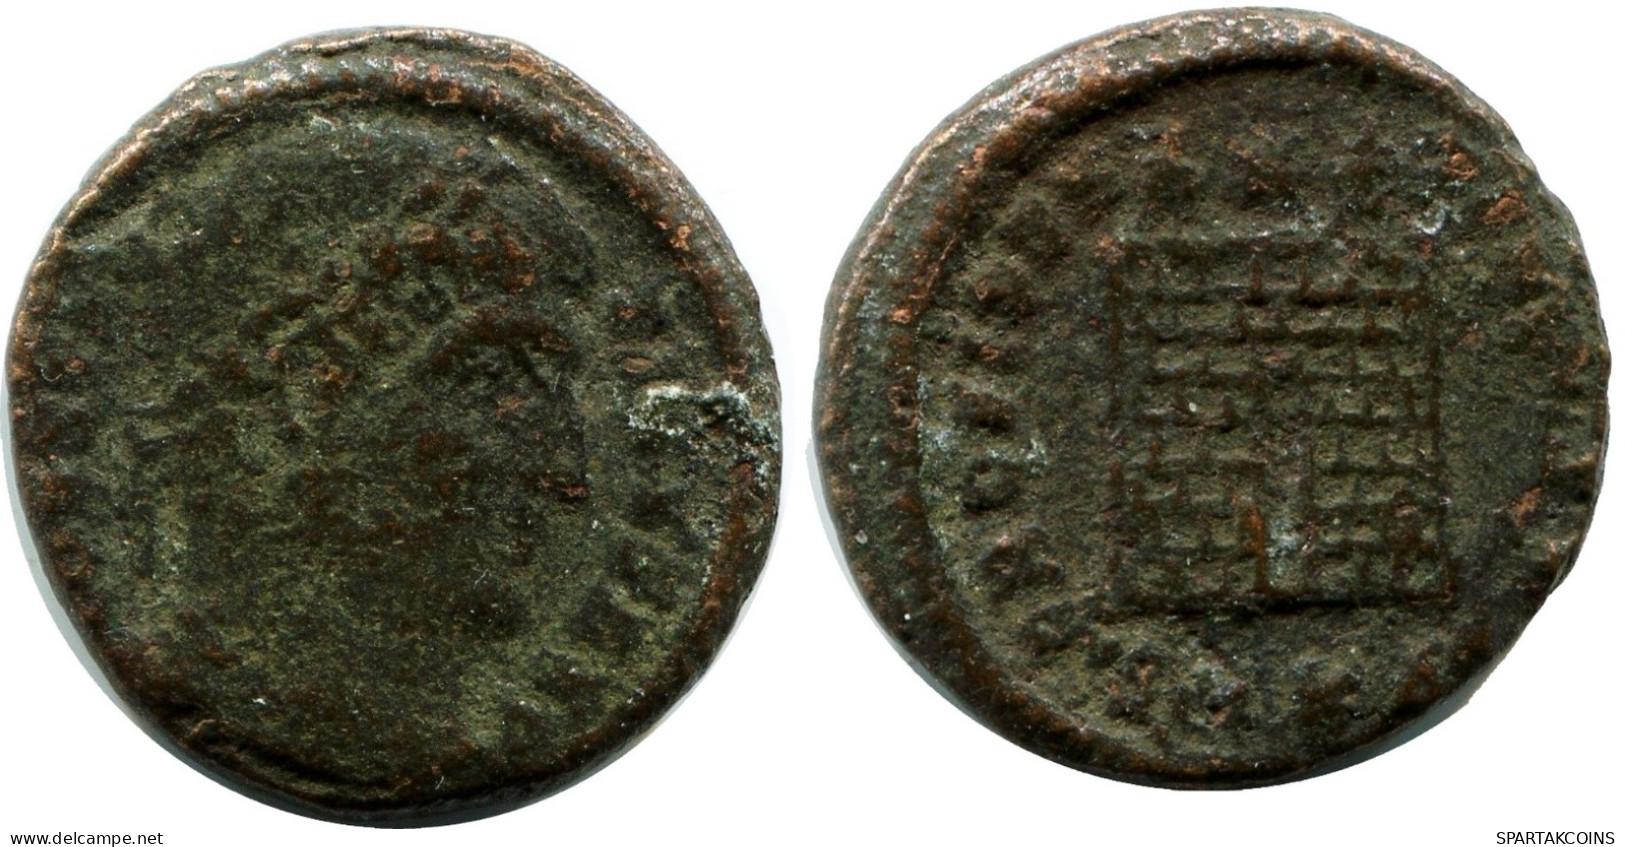 CONSTANTINE I MINTED IN CYZICUS FROM THE ROYAL ONTARIO MUSEUM #ANC11002.14.E.A - The Christian Empire (307 AD To 363 AD)